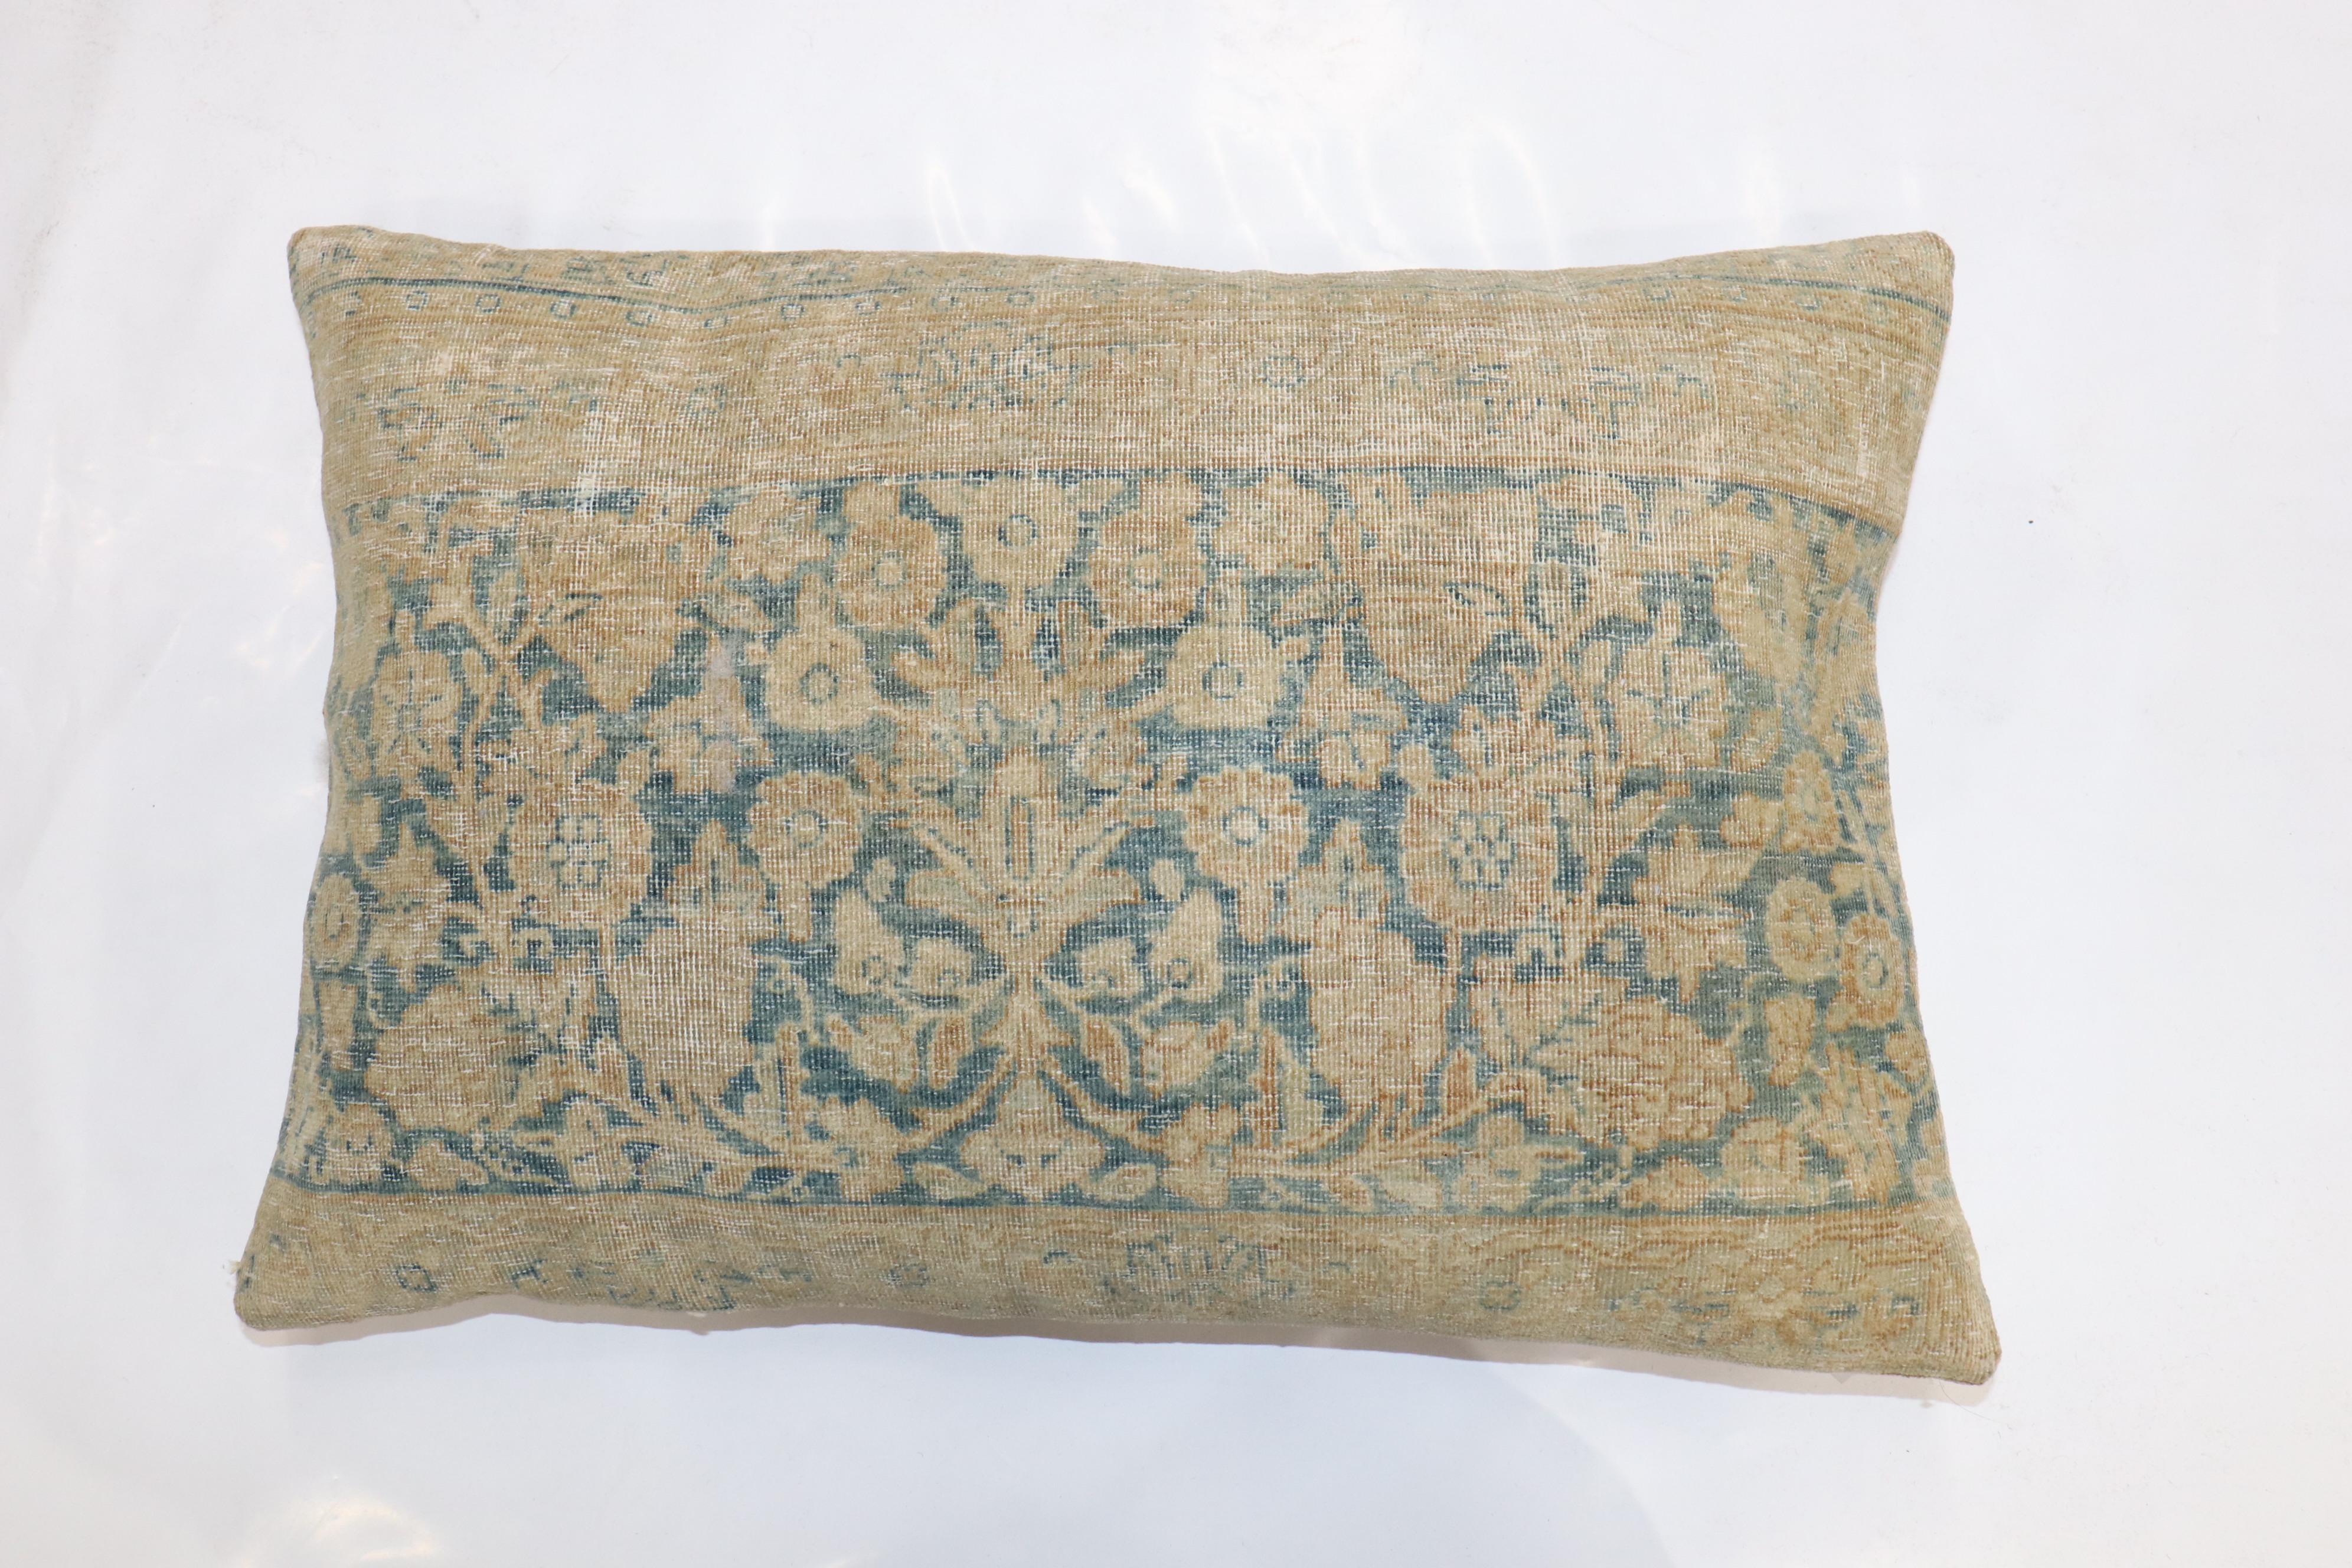 Pillow made from a 19th century Persian Kerman rug. Fill insert and zipper closure provided

Measures: 16